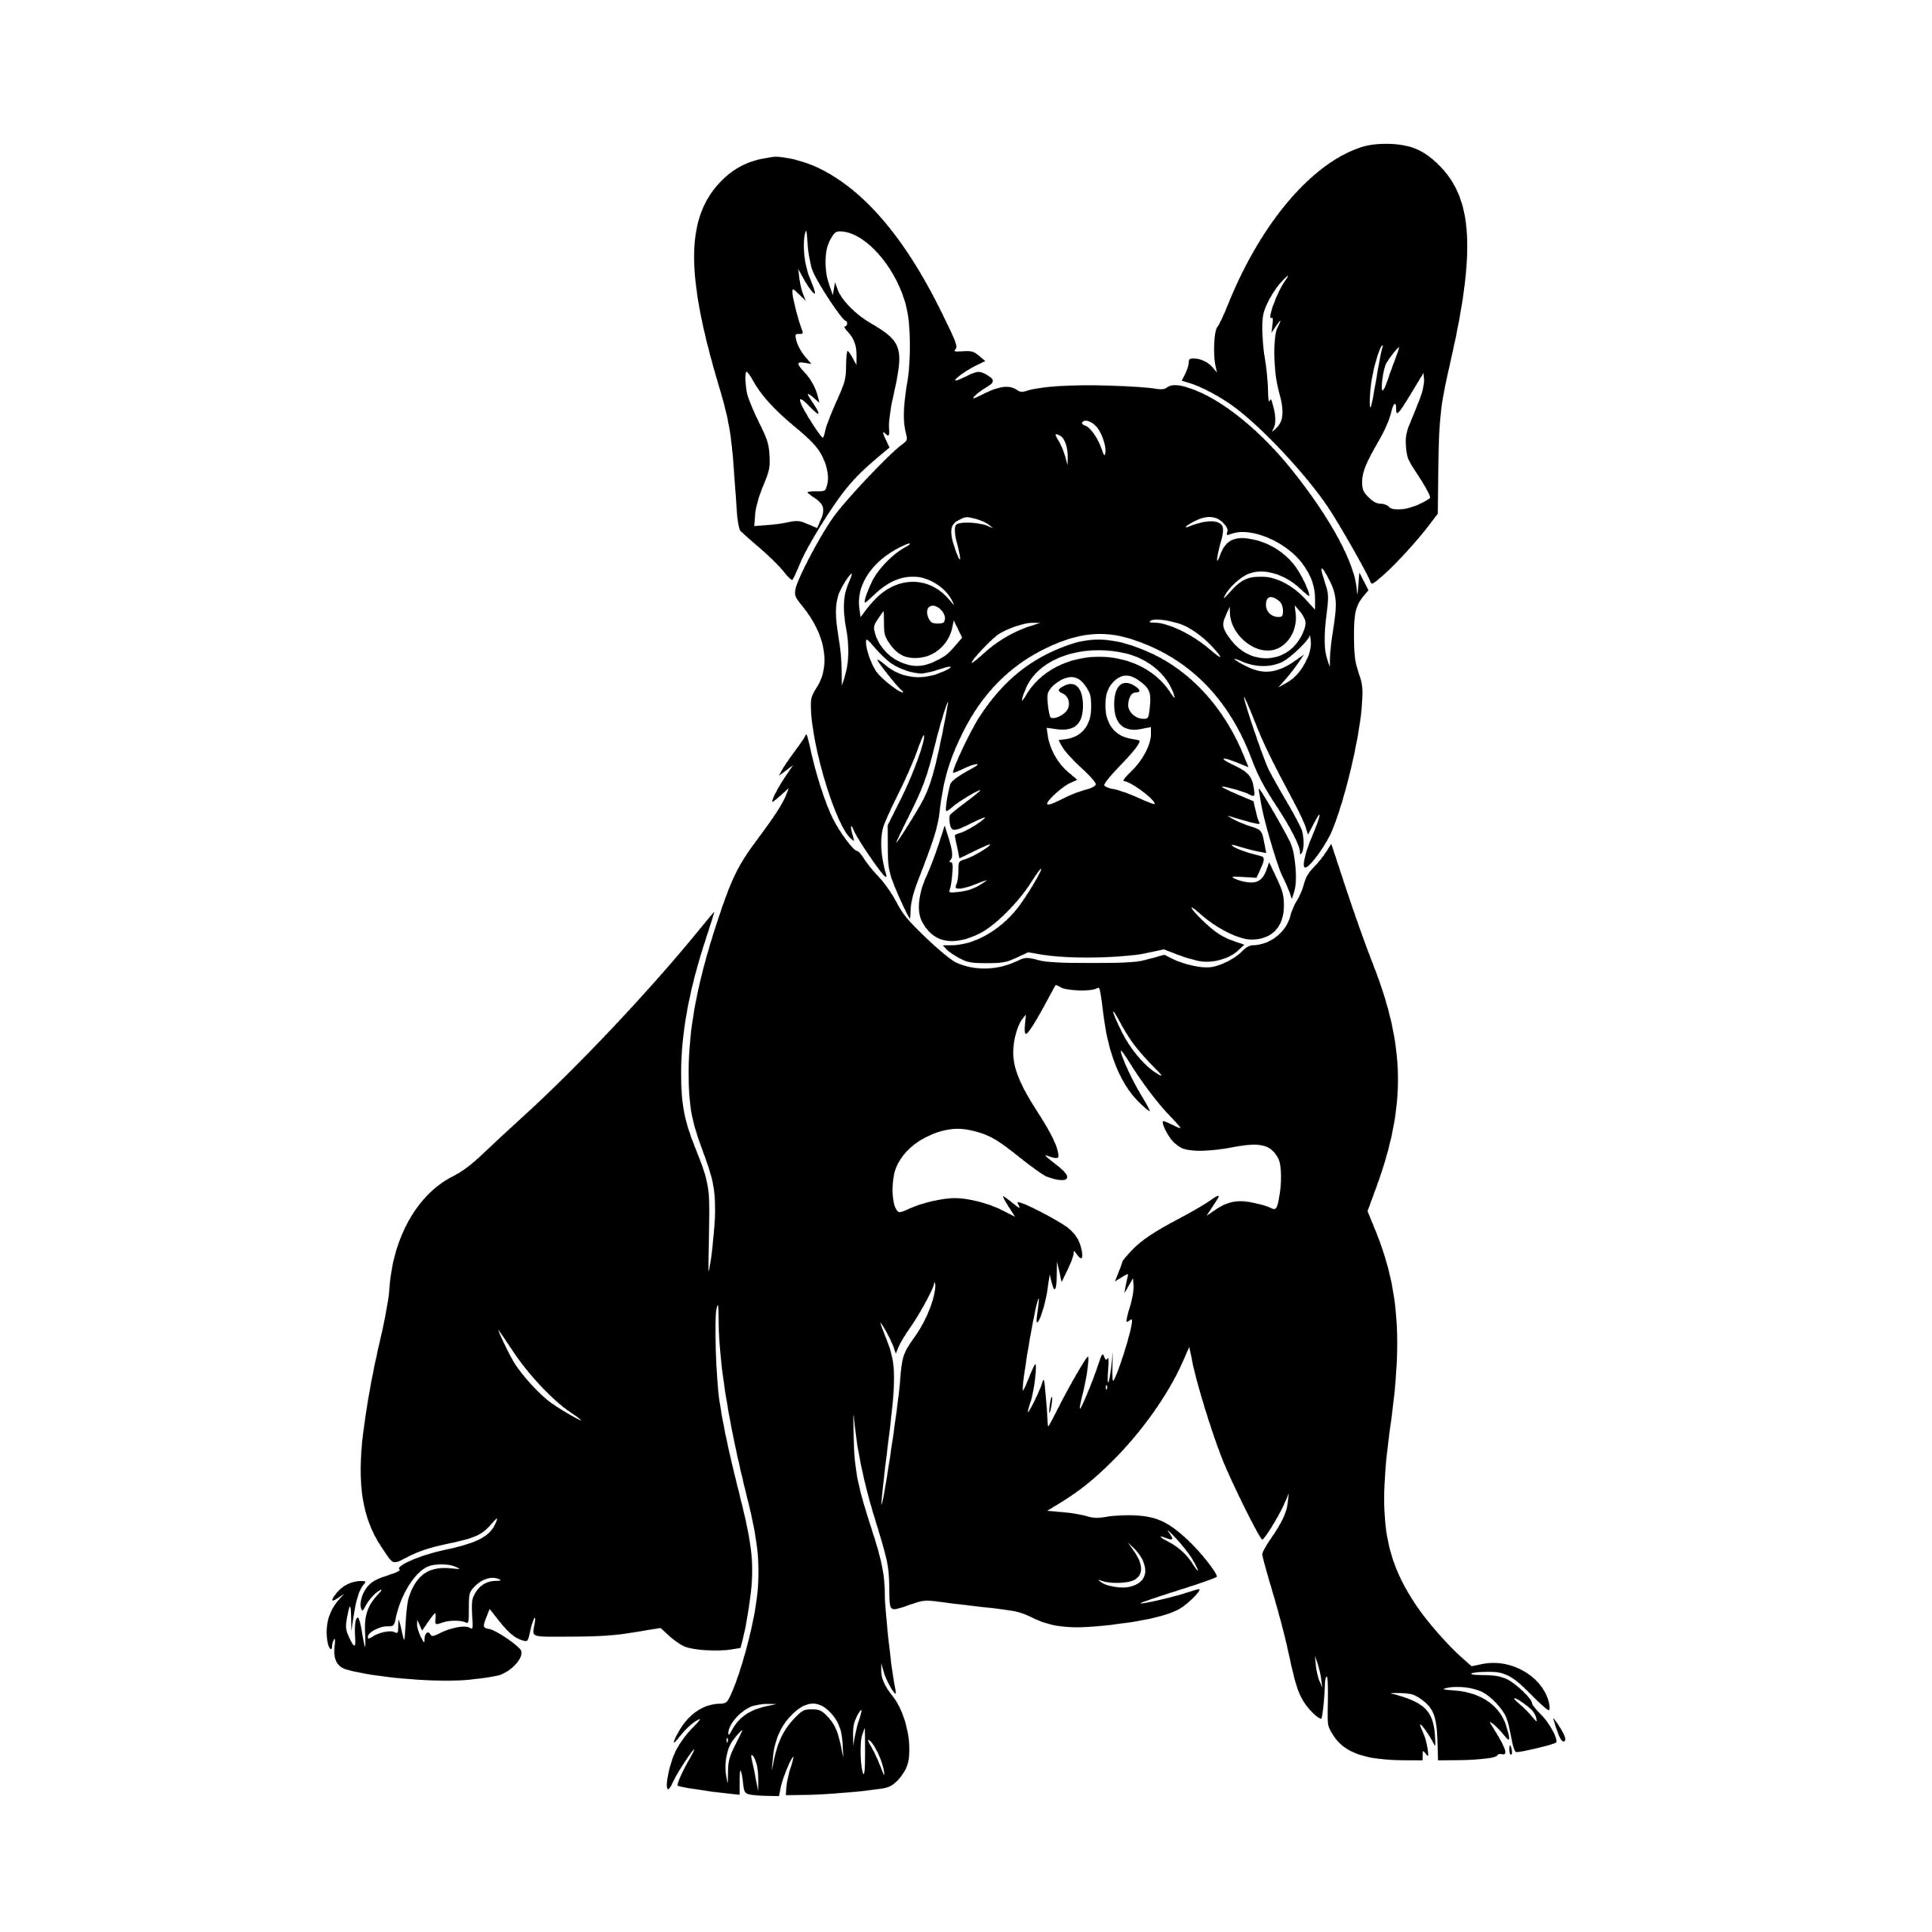 Adorable French Bulldog SVG File for Cricut, Silhouette, Laser Machines